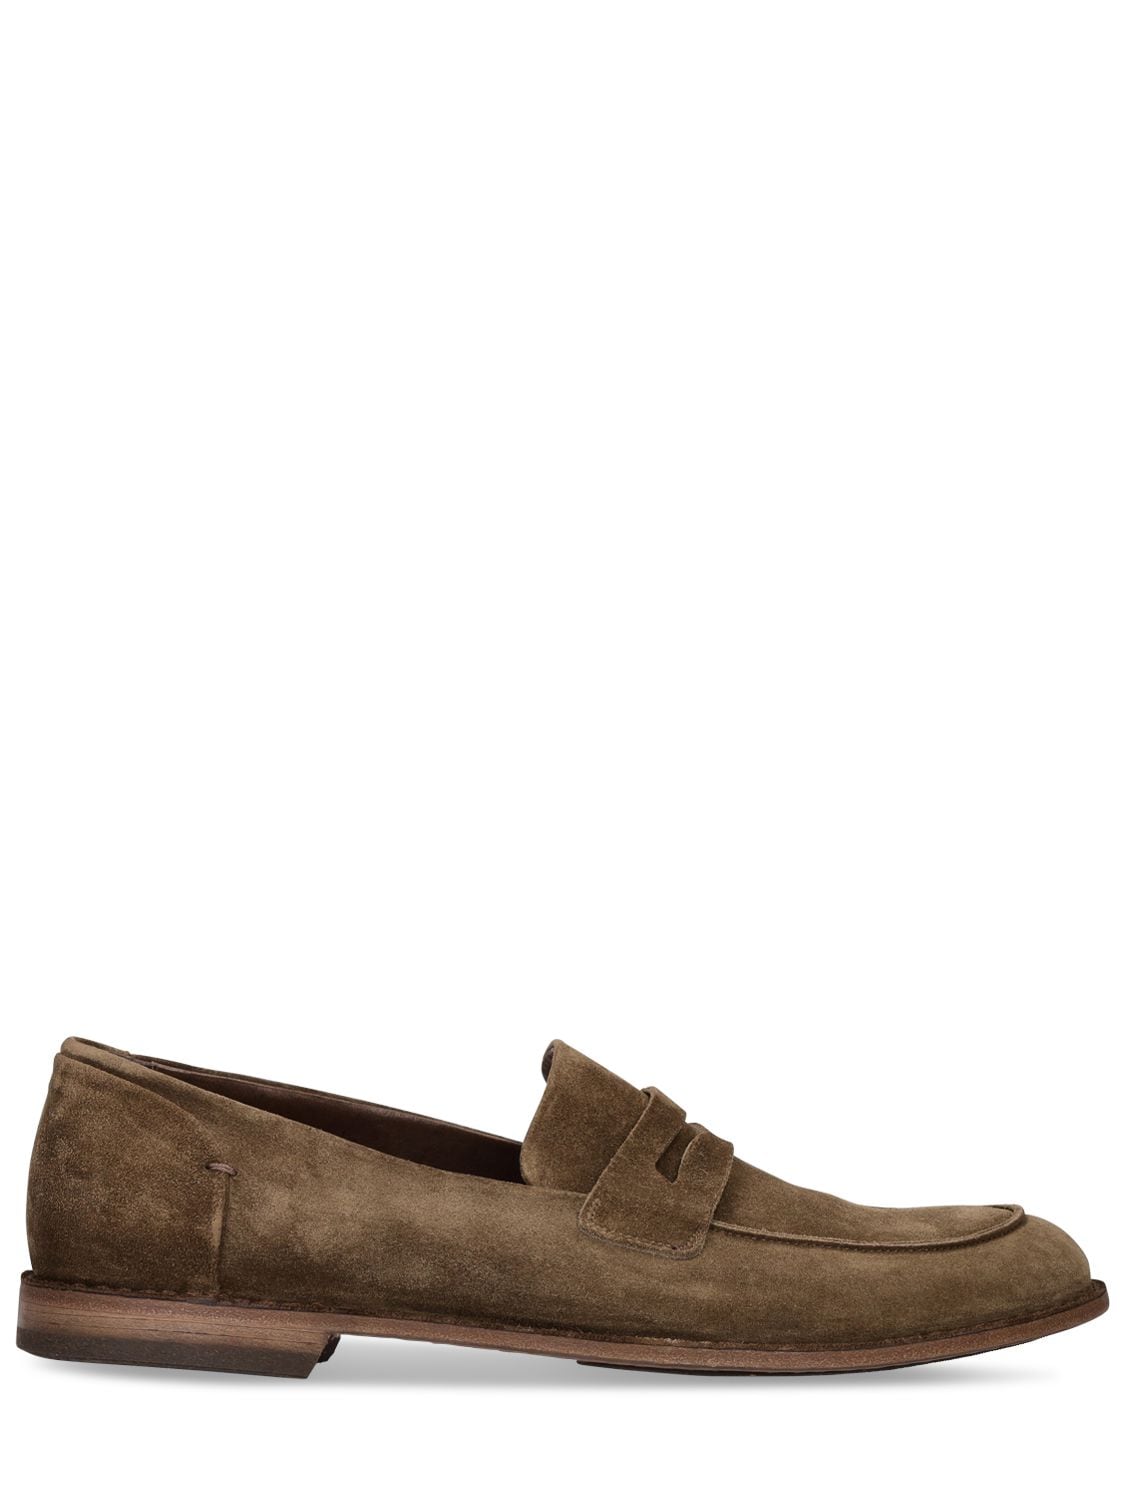 Kostant Suede Leather Loafers – MEN > SHOES > LOAFERS